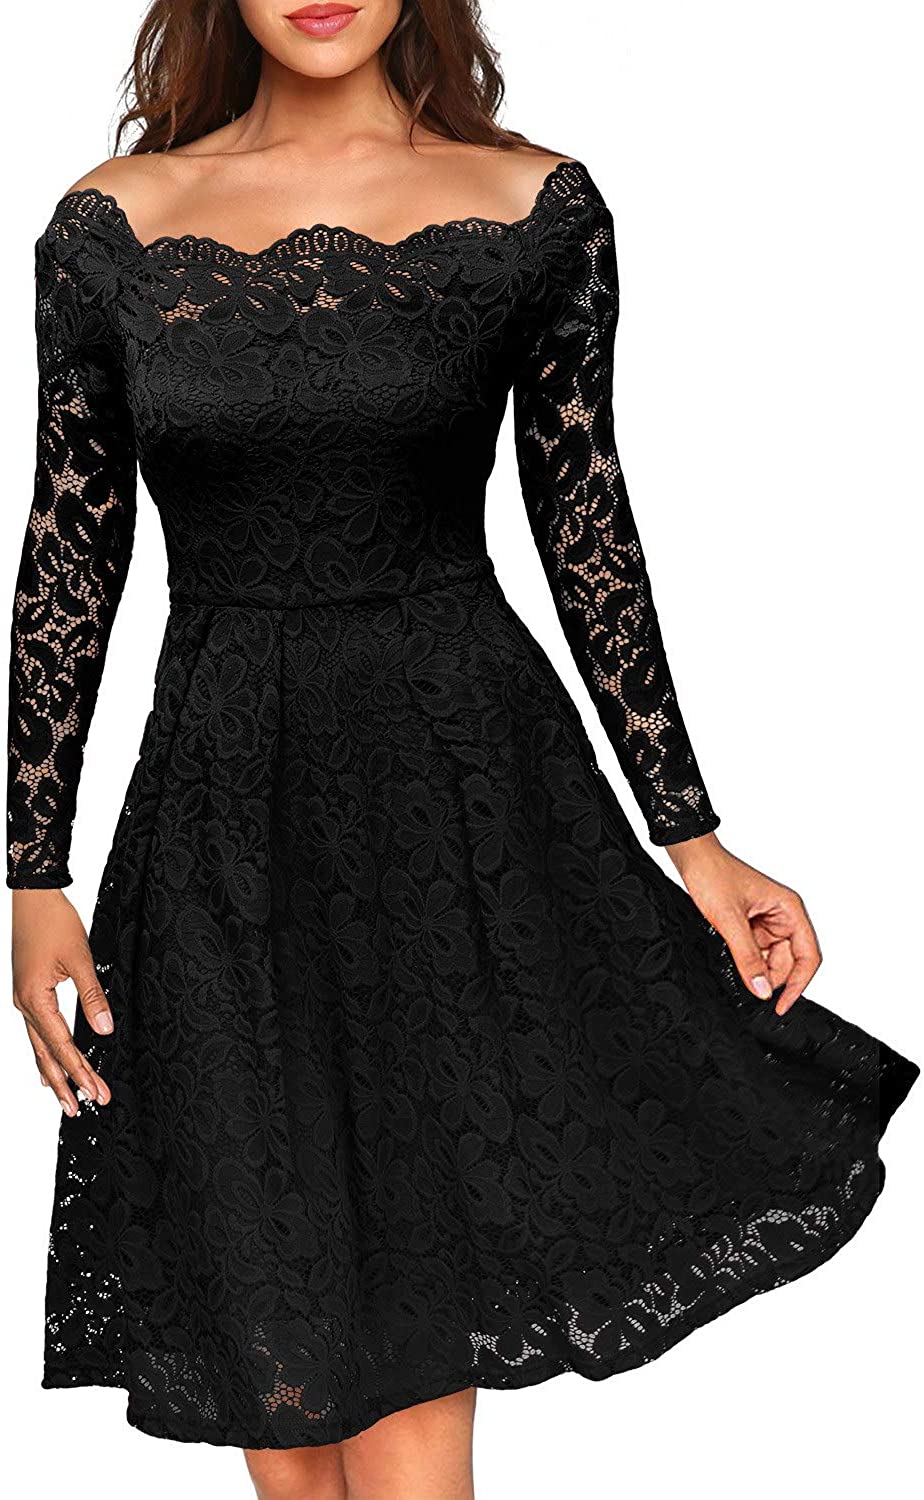 MISSMAY Women's Vintage Floral Lace Long Sleeve Boat Neck Cocktail Party  Swing D | eBay